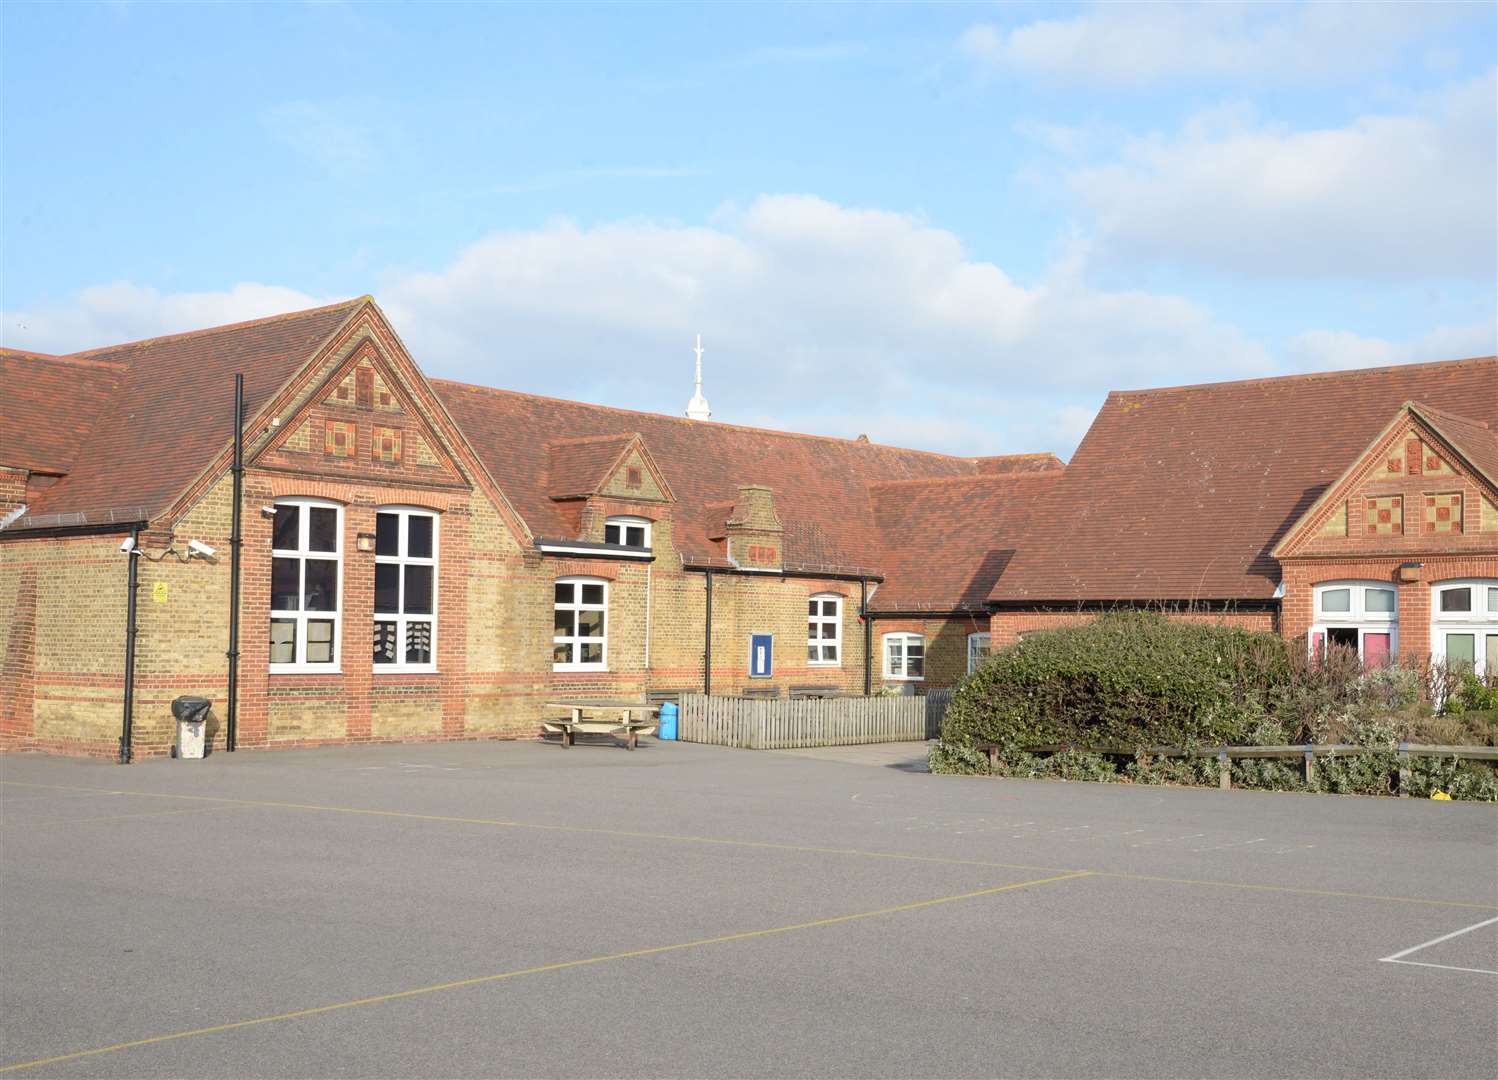 Pupils at Herne Bay Junior School have fallen ill with a winter sickness bug